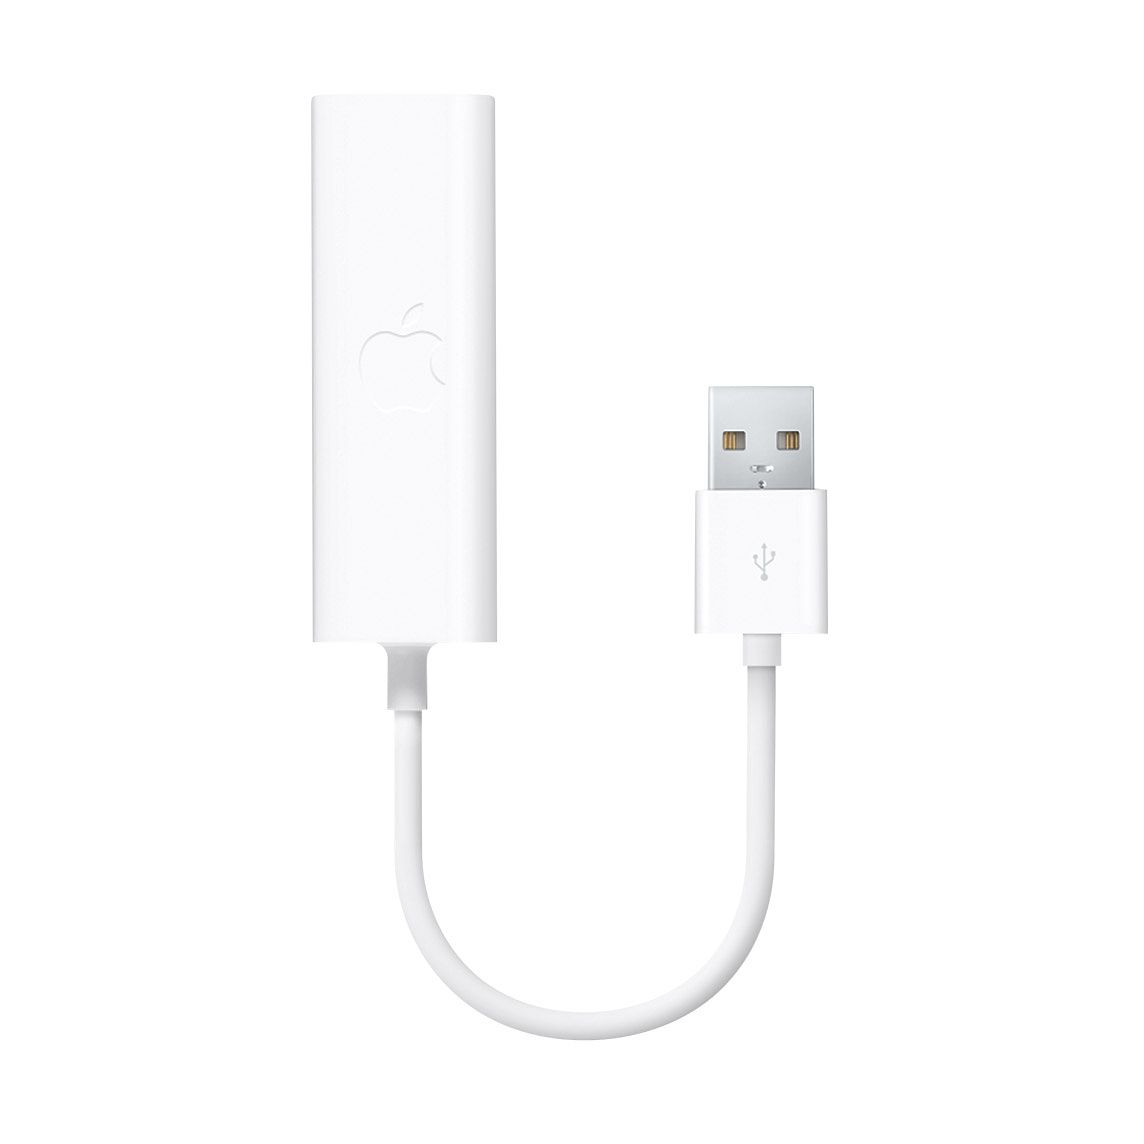 Apple USB to Ethernet Adapter - Lâm Phong Store